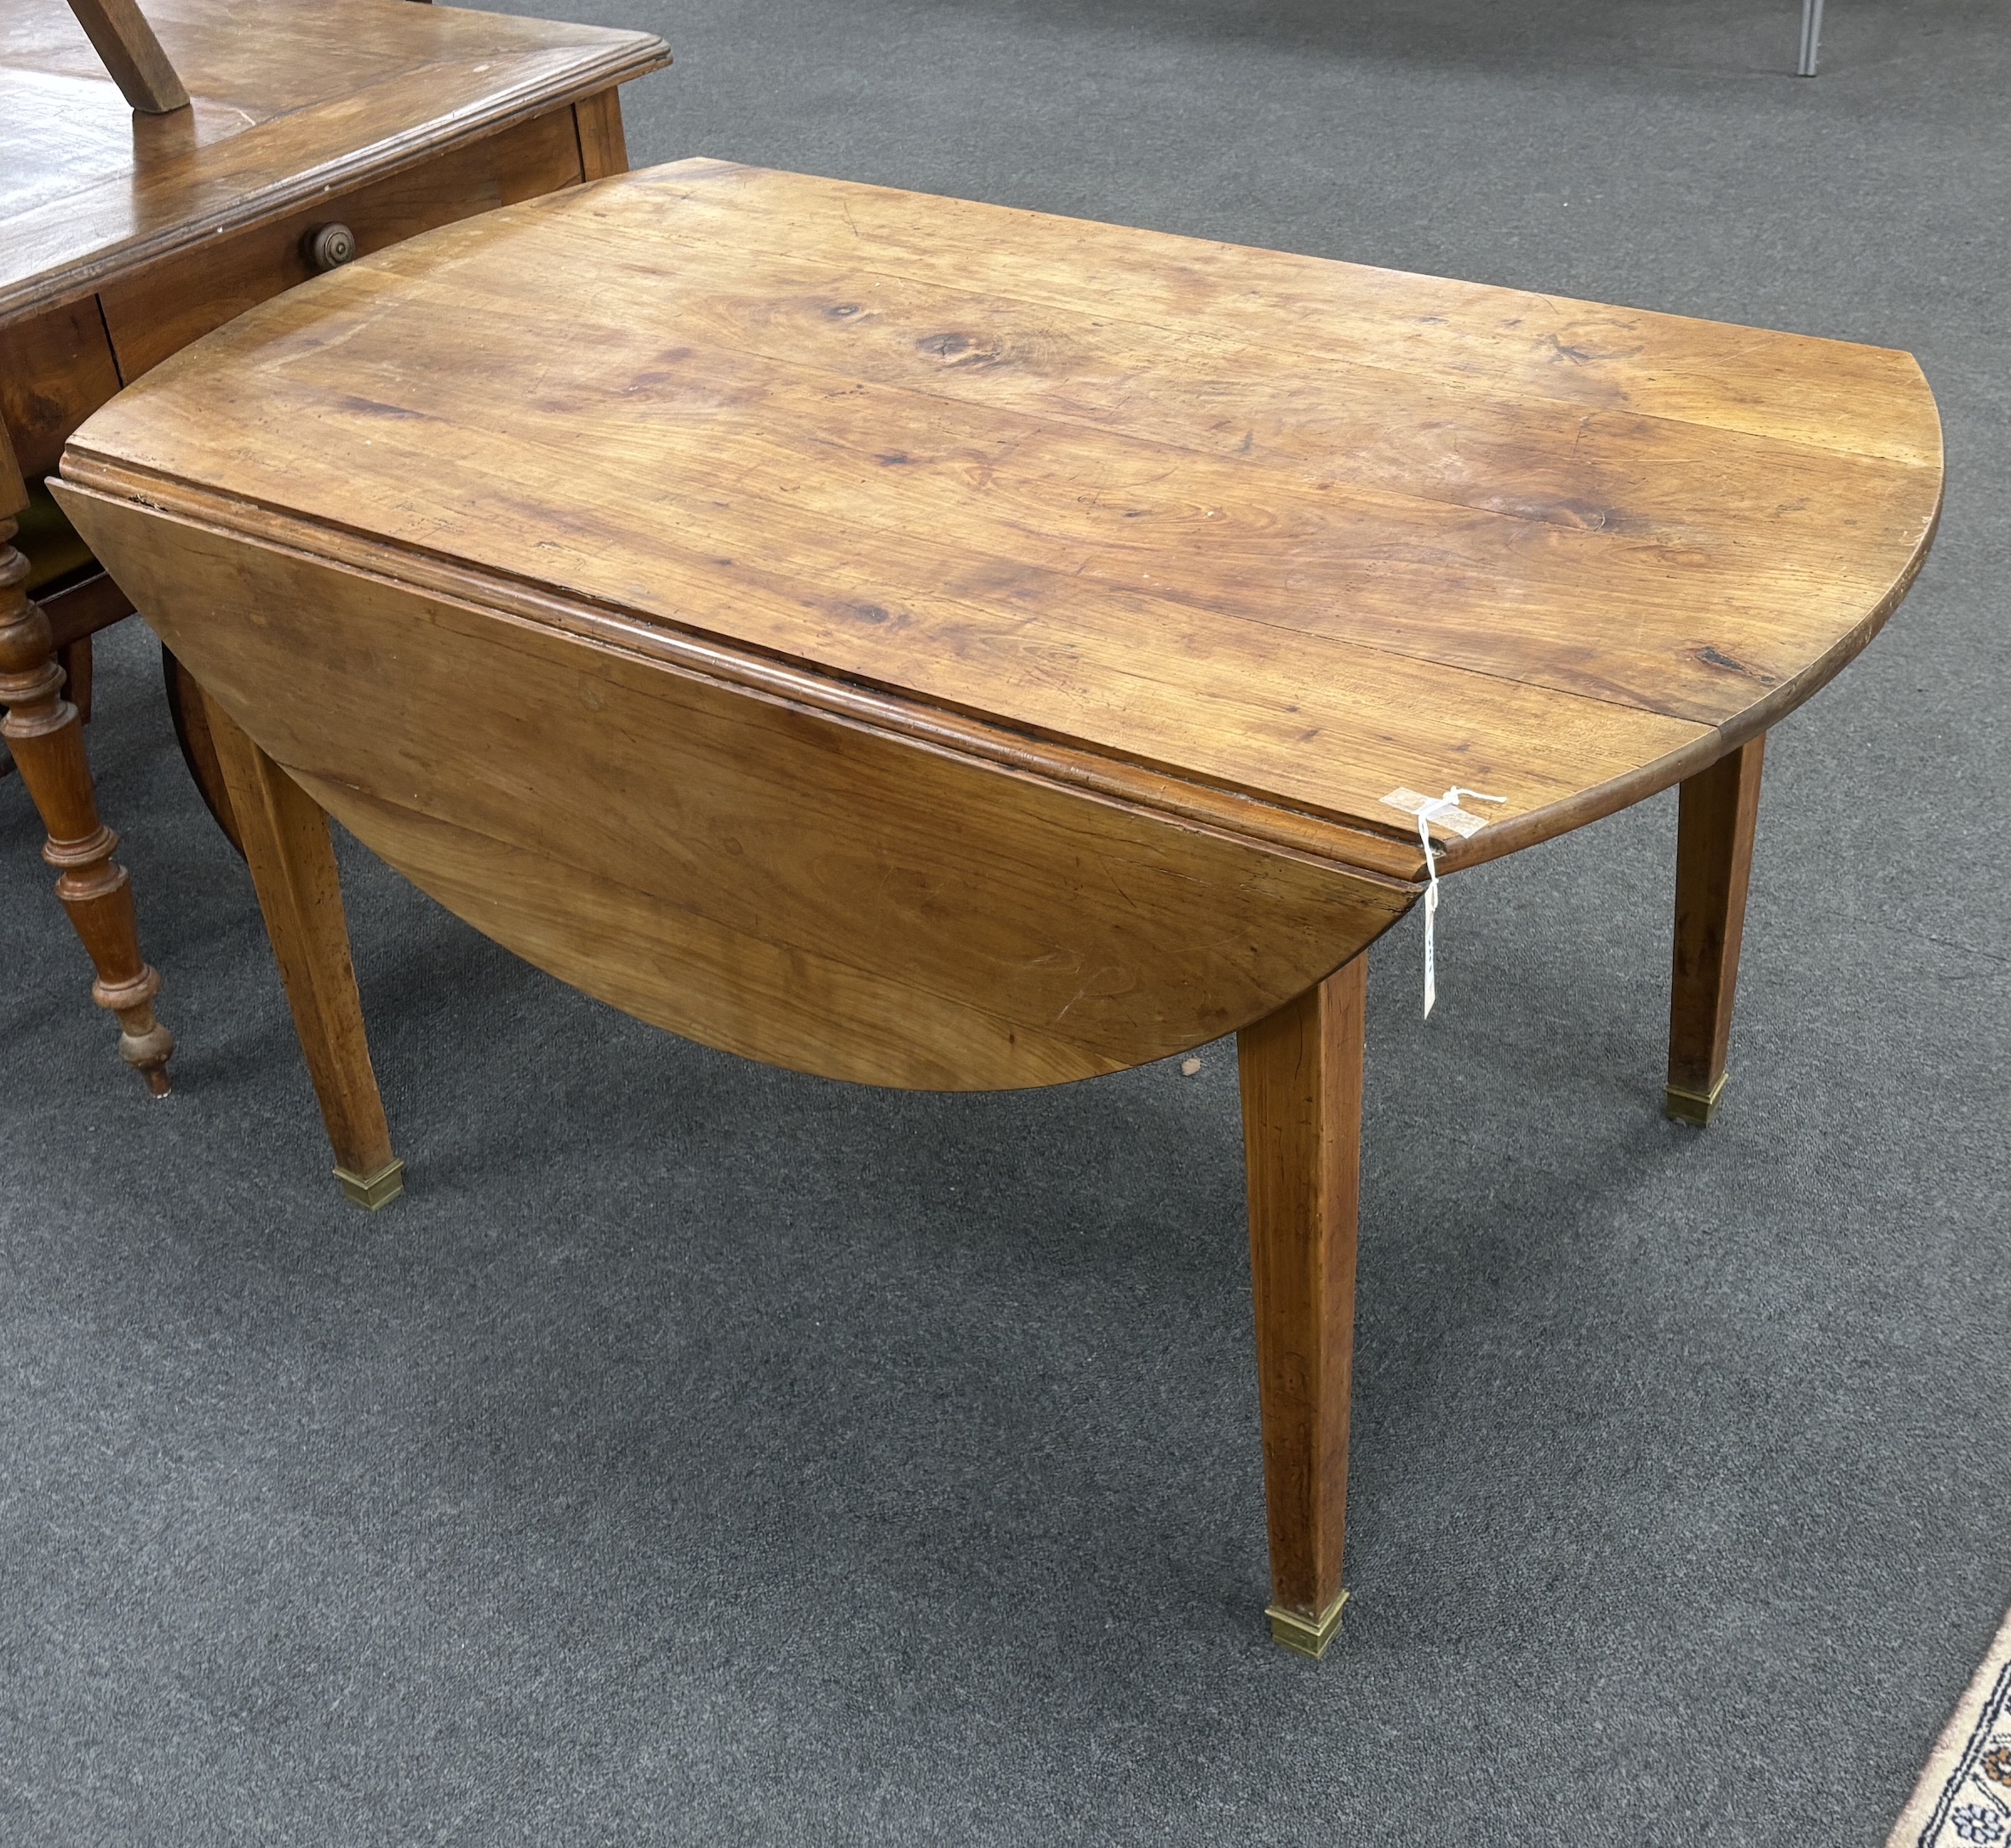 A 19th century French oval cherry drop flap kitchen table, width 136cm, depth 134cm extended, height 71cm